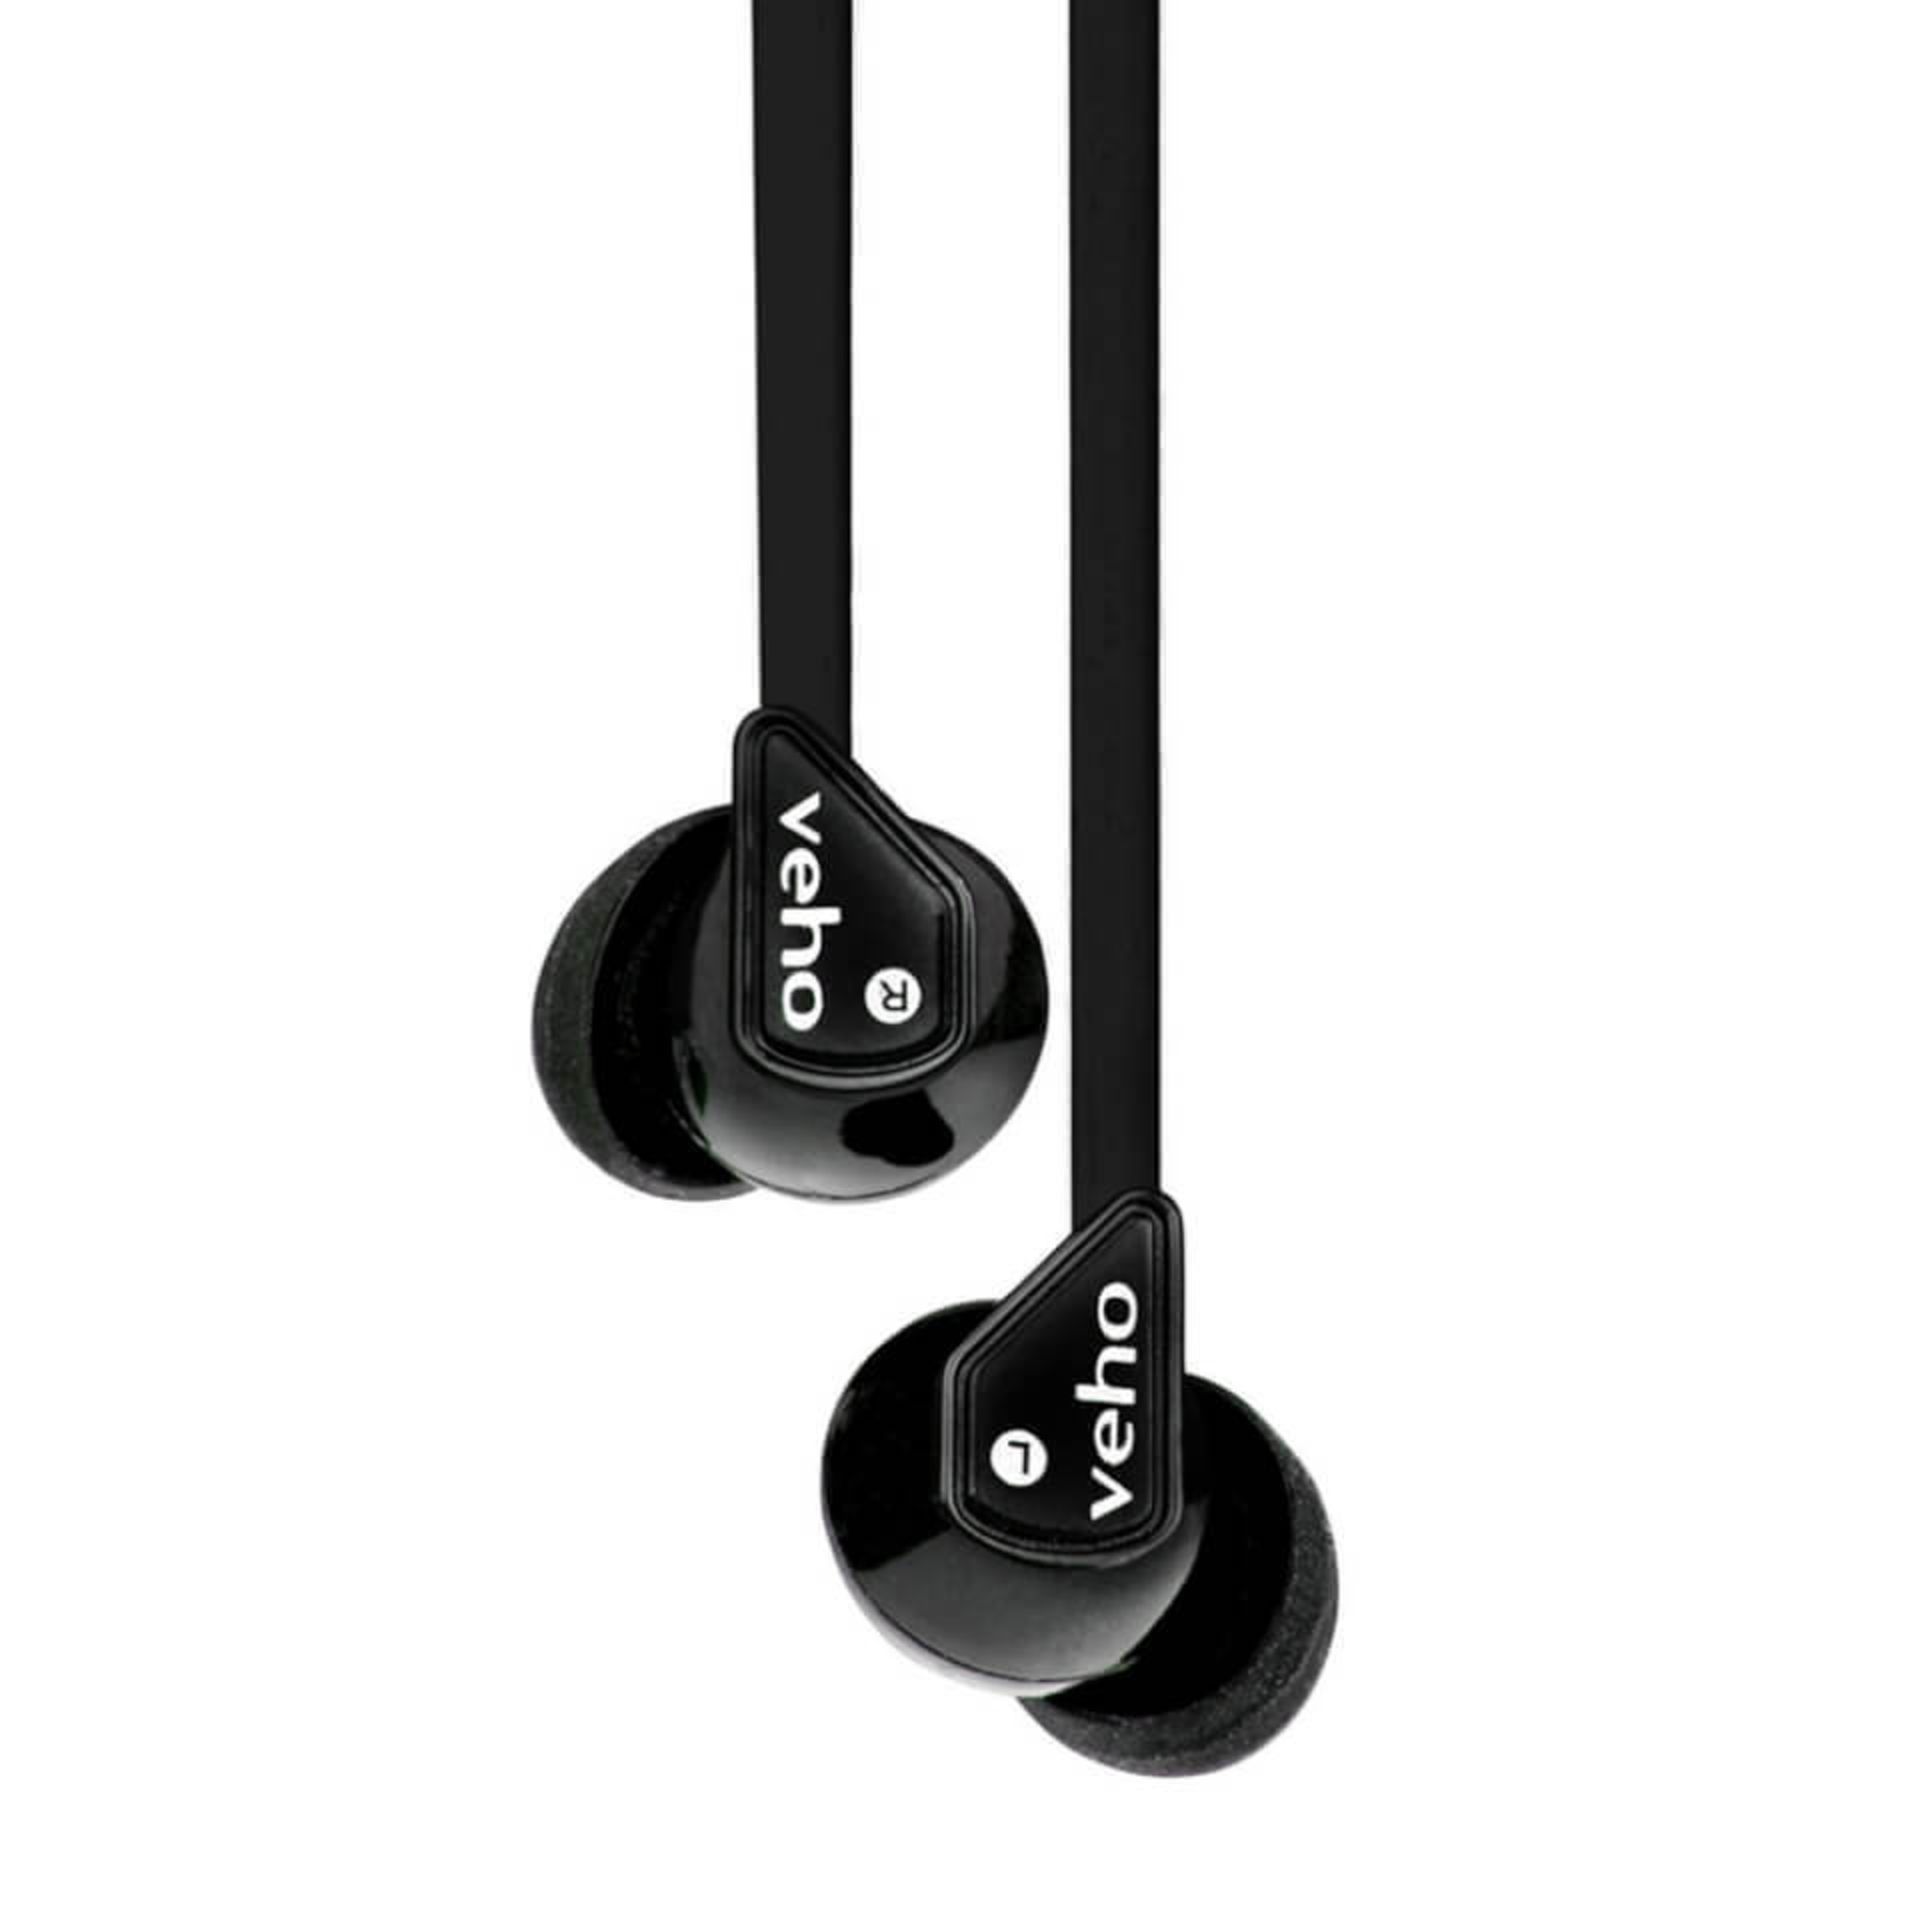 V *TRADE QTY* Brand New Veho Z-1 Noise Isolating Stereo Earbuds - Black - Online Price £19.95 X 3